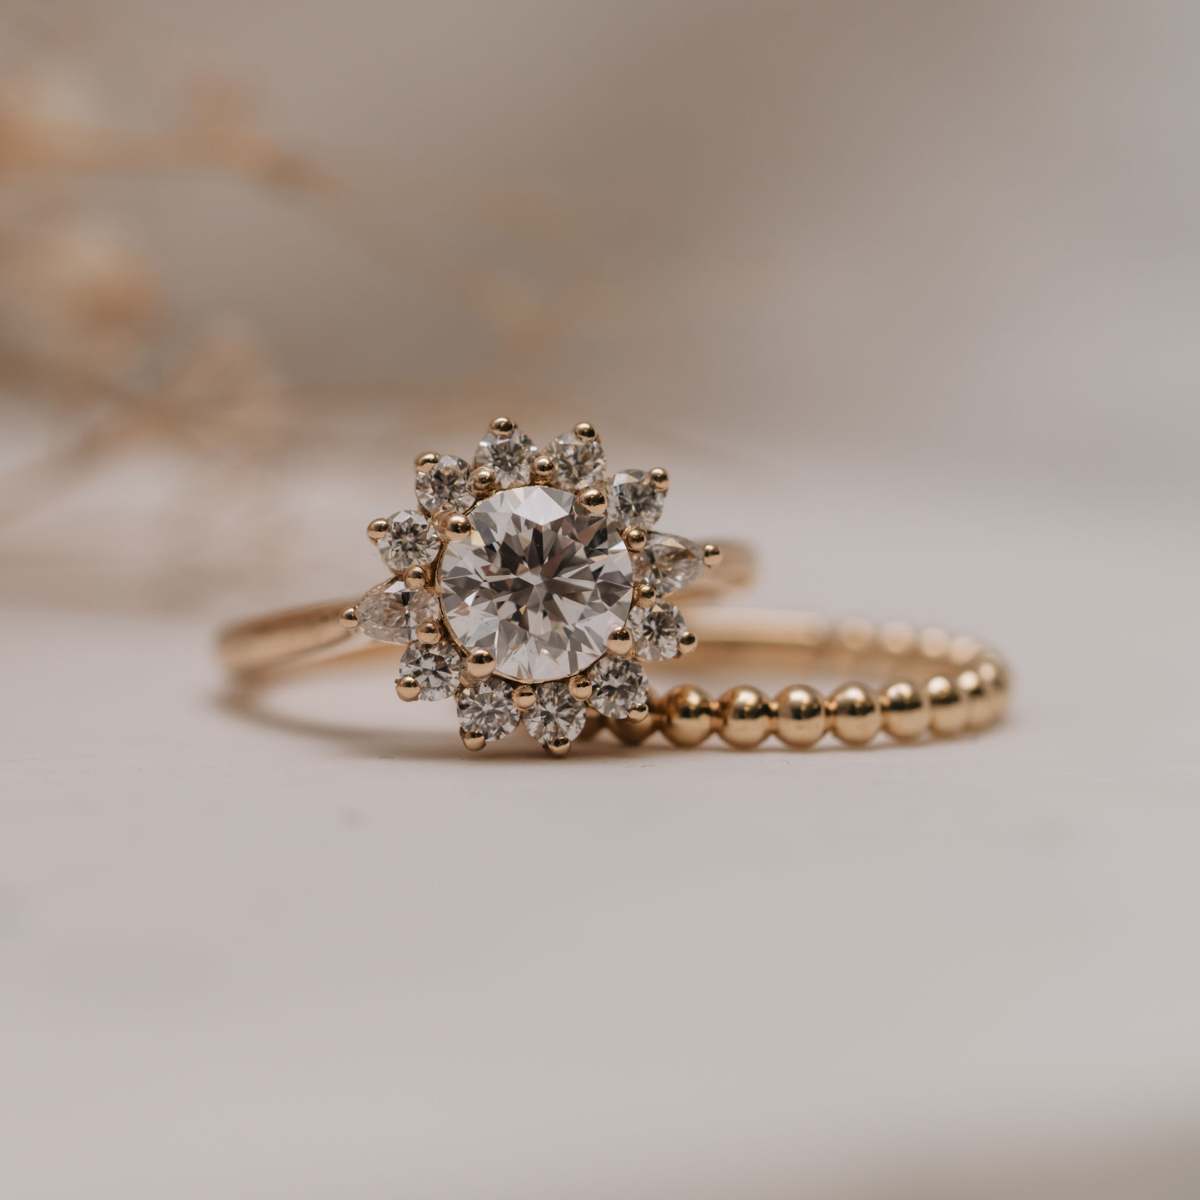 Ethical Logo | Lab-grown ethical diamonds | sustainable engagement rings and wedding bands | Gold diamond ring